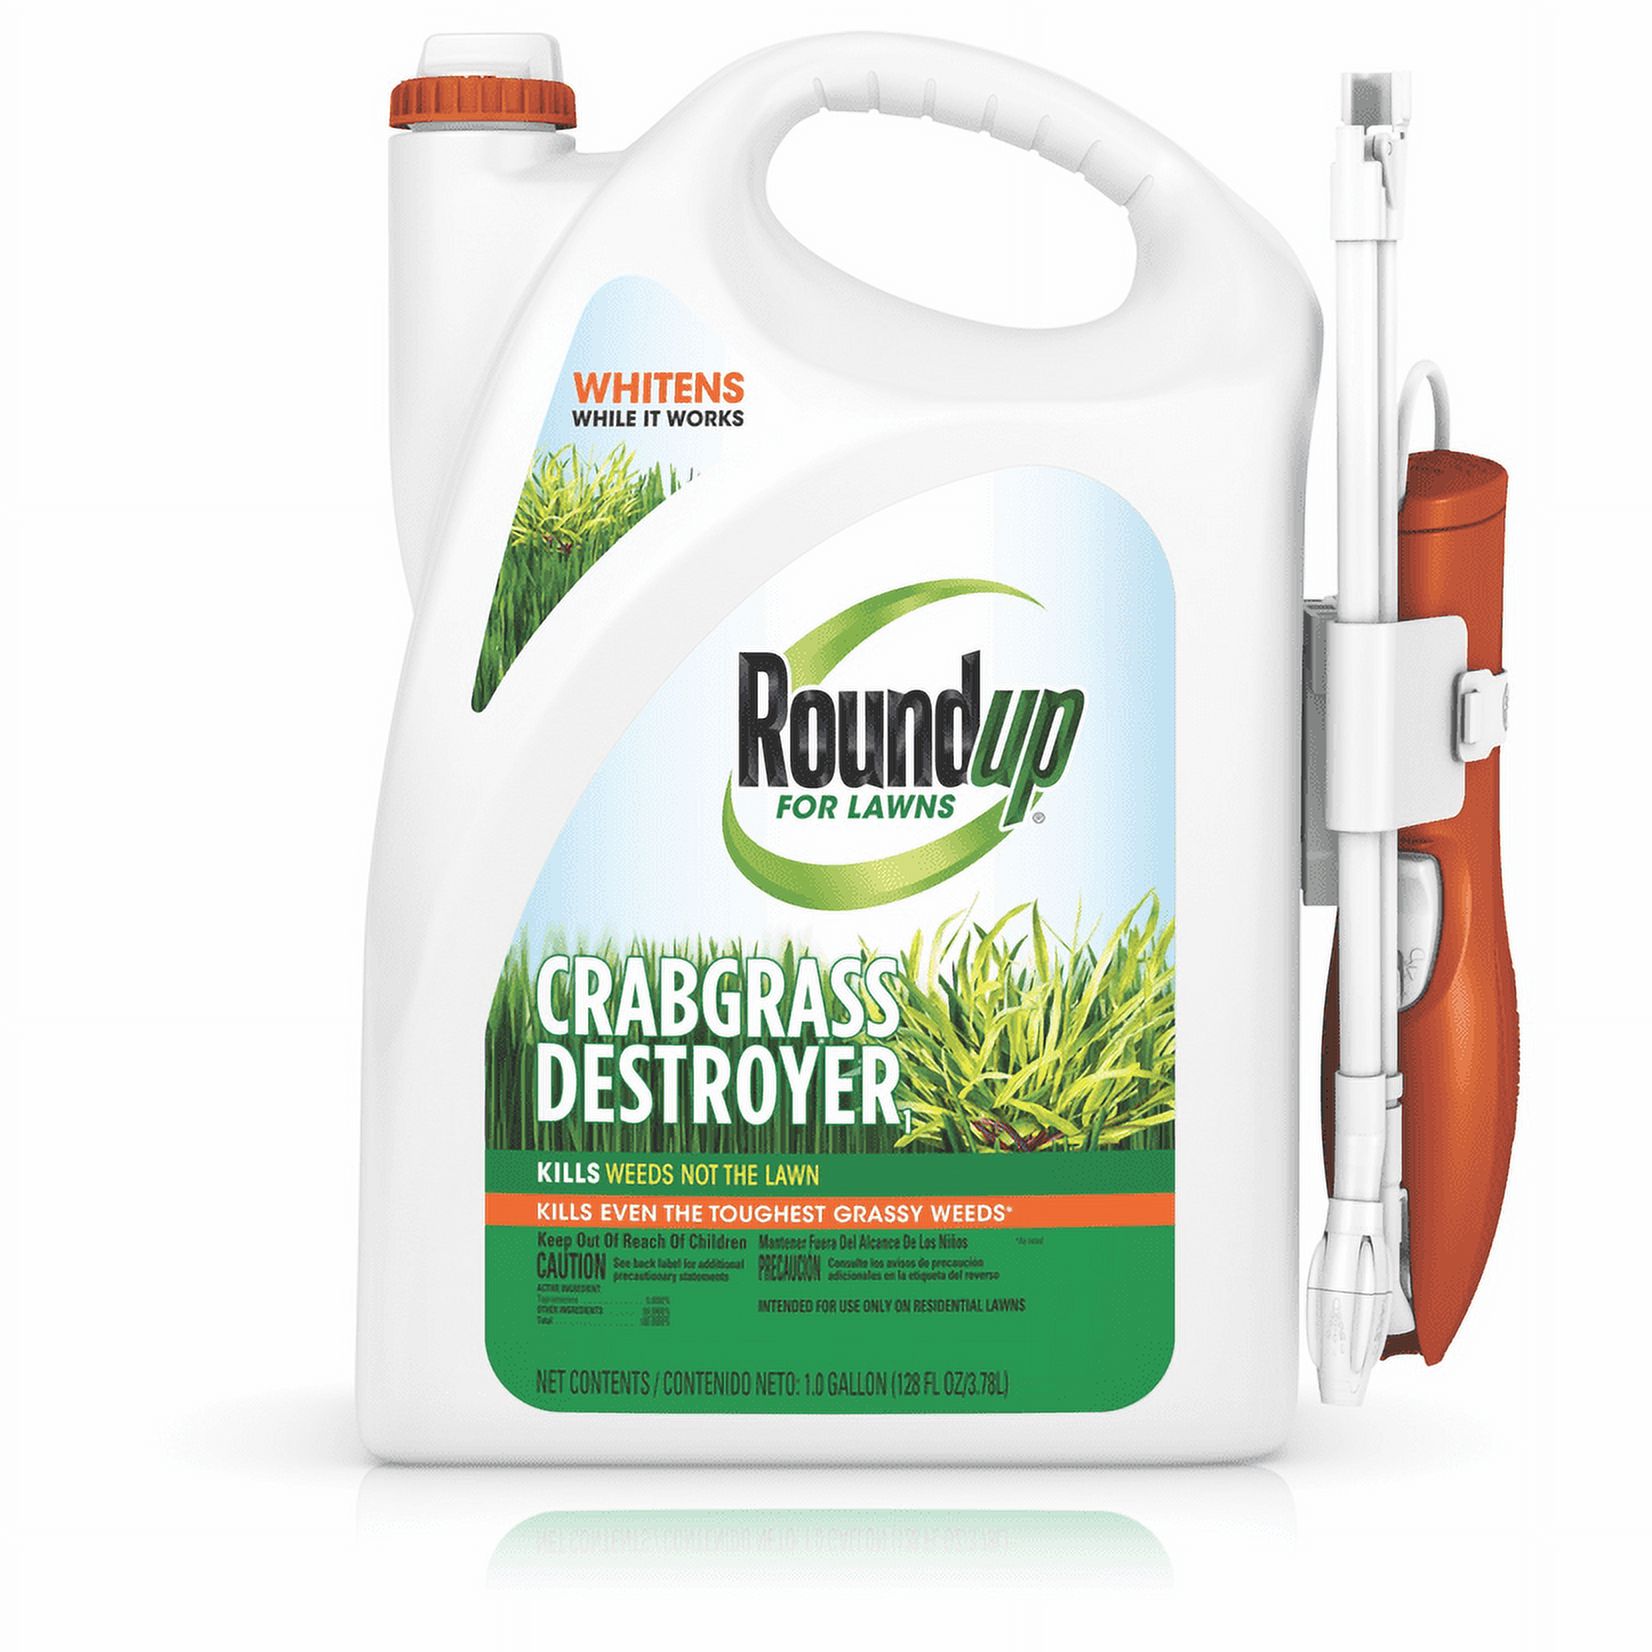 Roundup For Lawns Crabgrass Destroyer₁ Ready-to-Use with Extend Wand, Grassy Weed Killer, 1 gal. - image 1 of 8